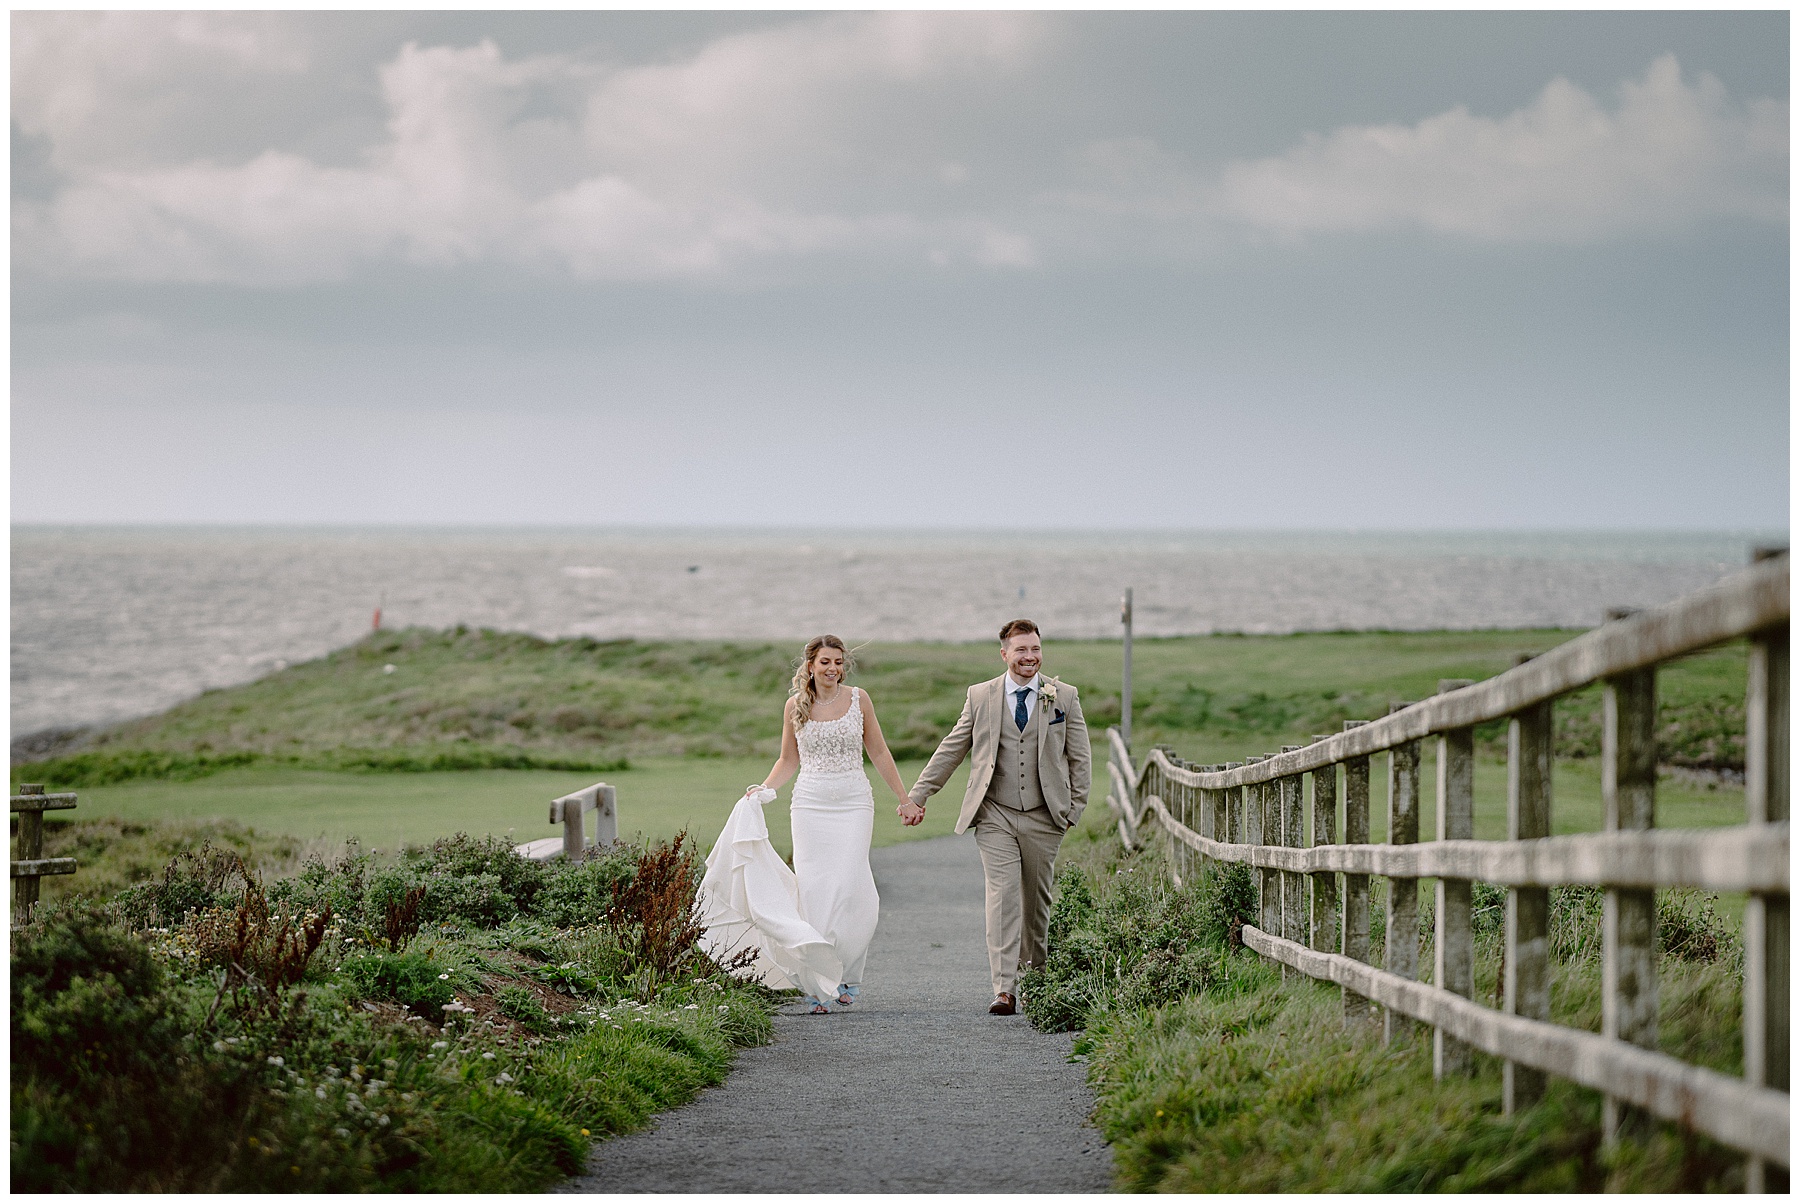 Bride & Groom Portraits at Cliff Hotel